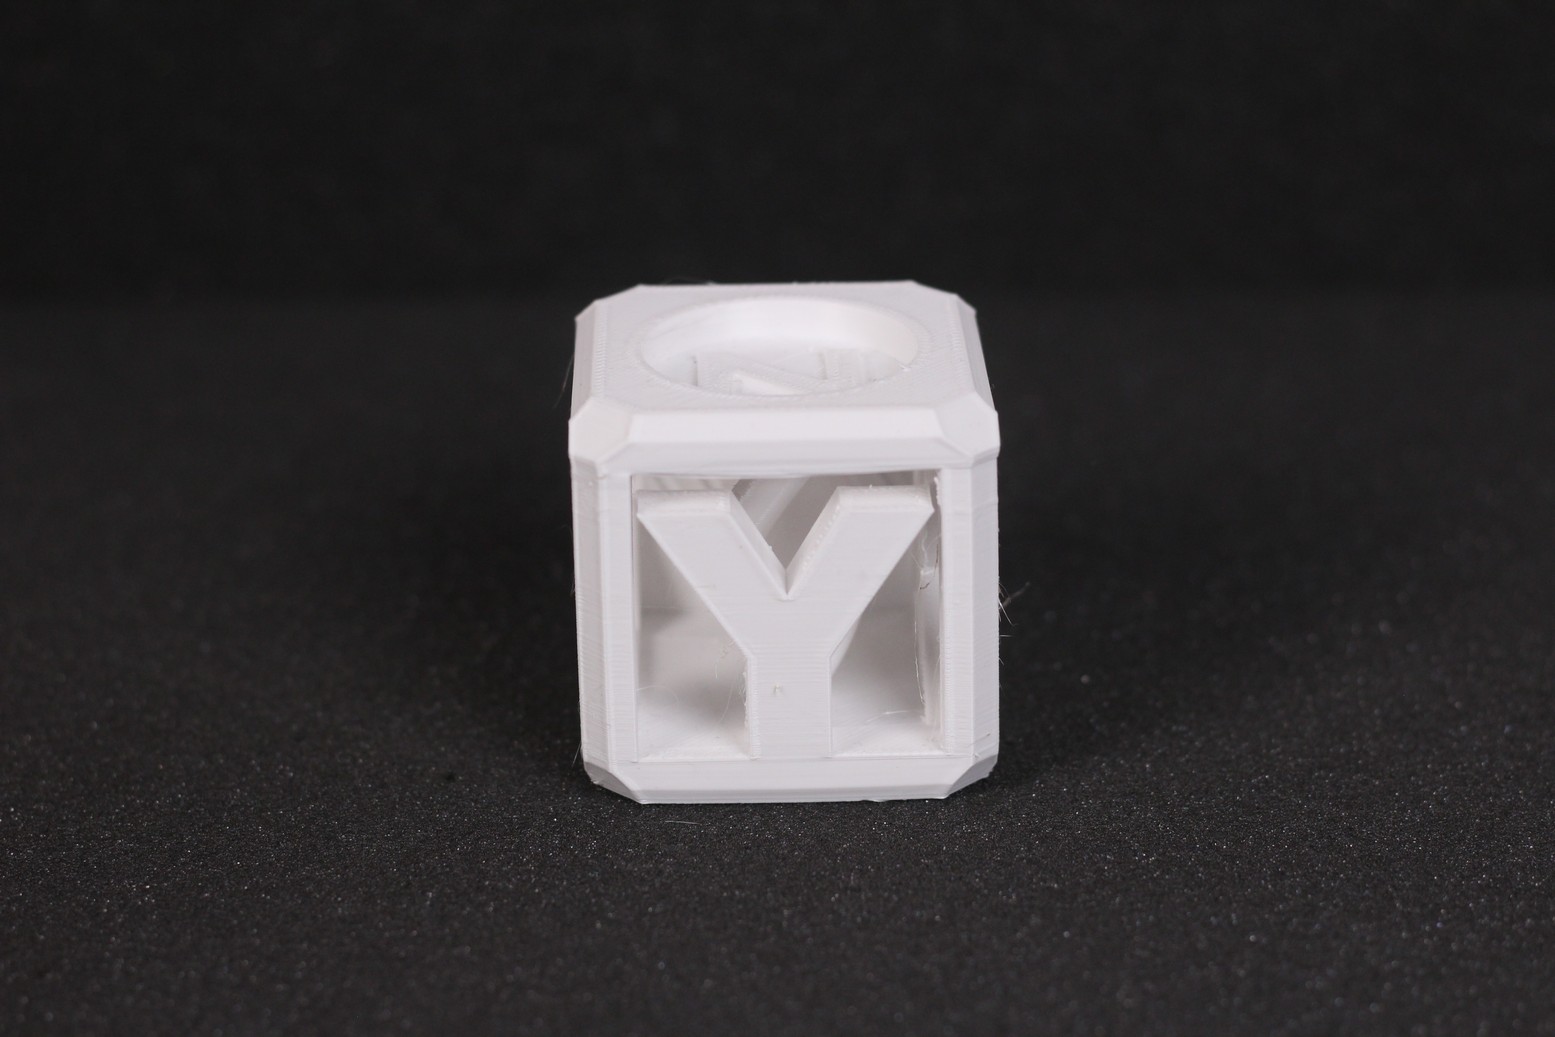 200 Helix Test Cube printed in PETG 1 | Creality Ender 2 Pro Review: Is it worth it?